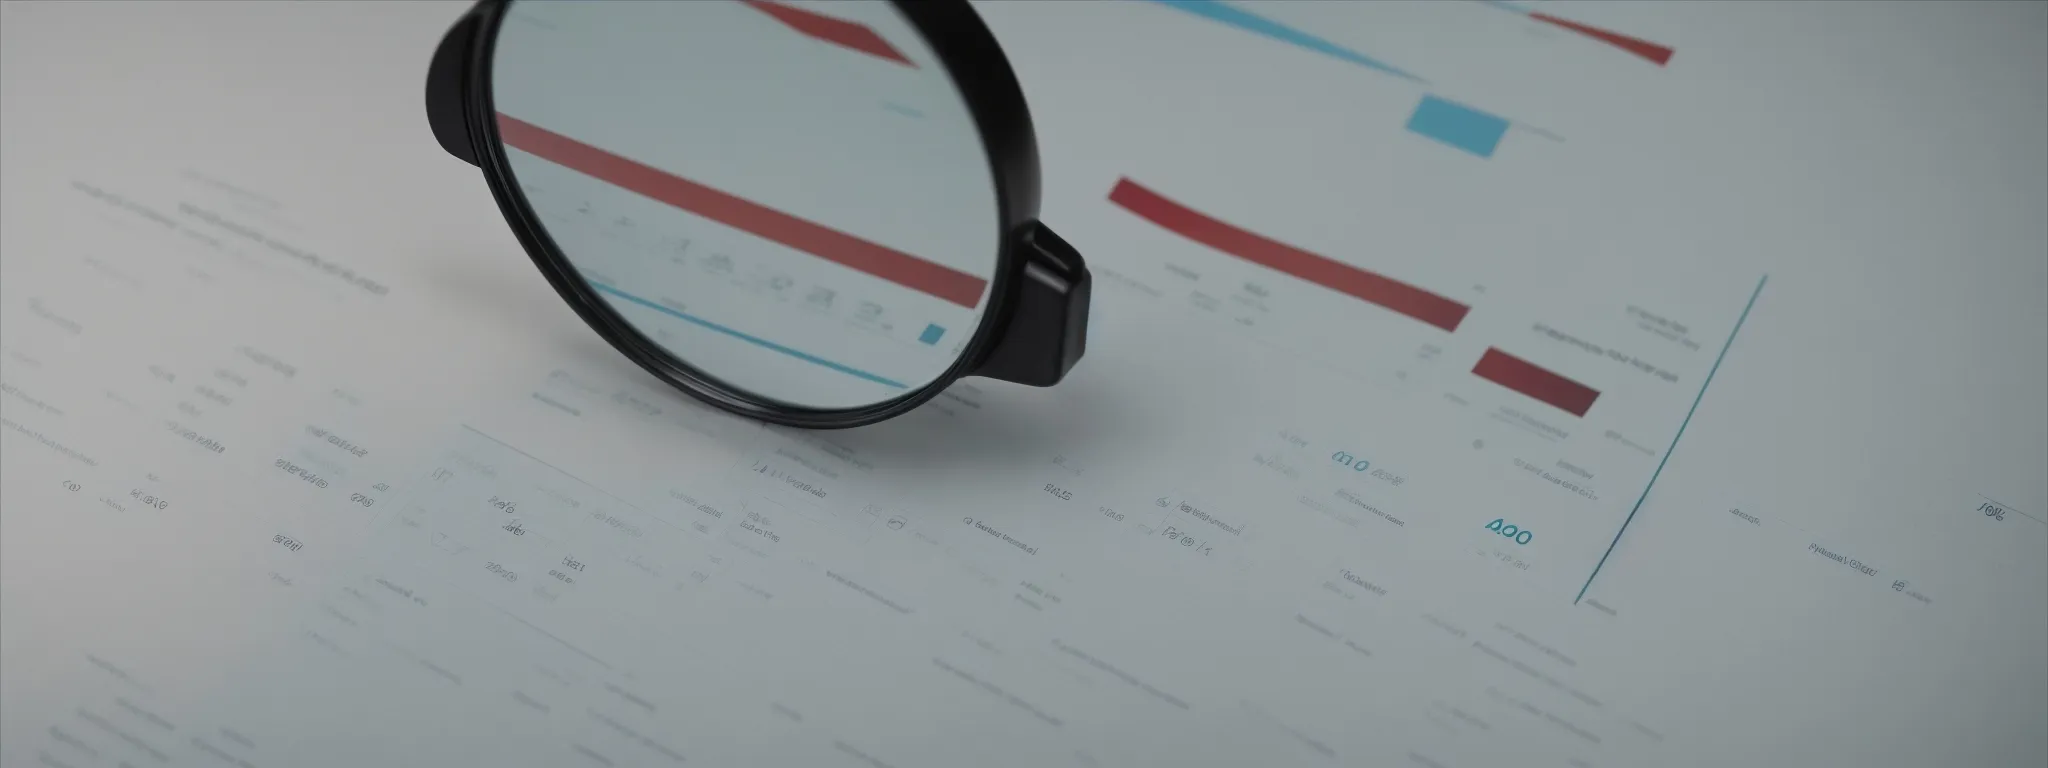 a close-up of a magnifying glass on a page filled with graphs and analytics charts.